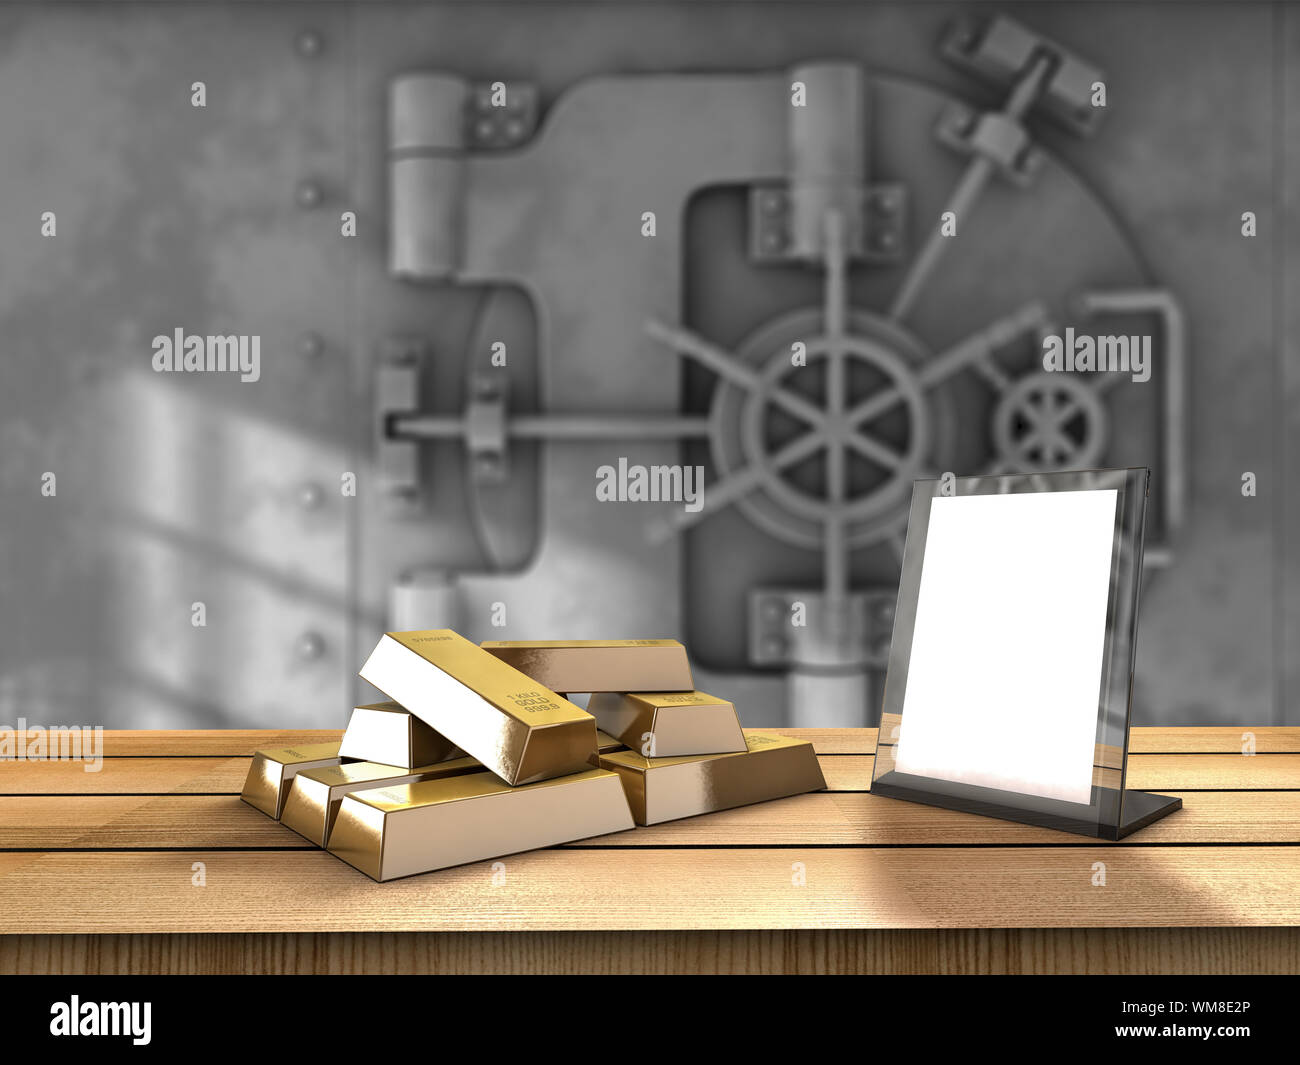 Table with gold bars and a vaul behind Stock Photo